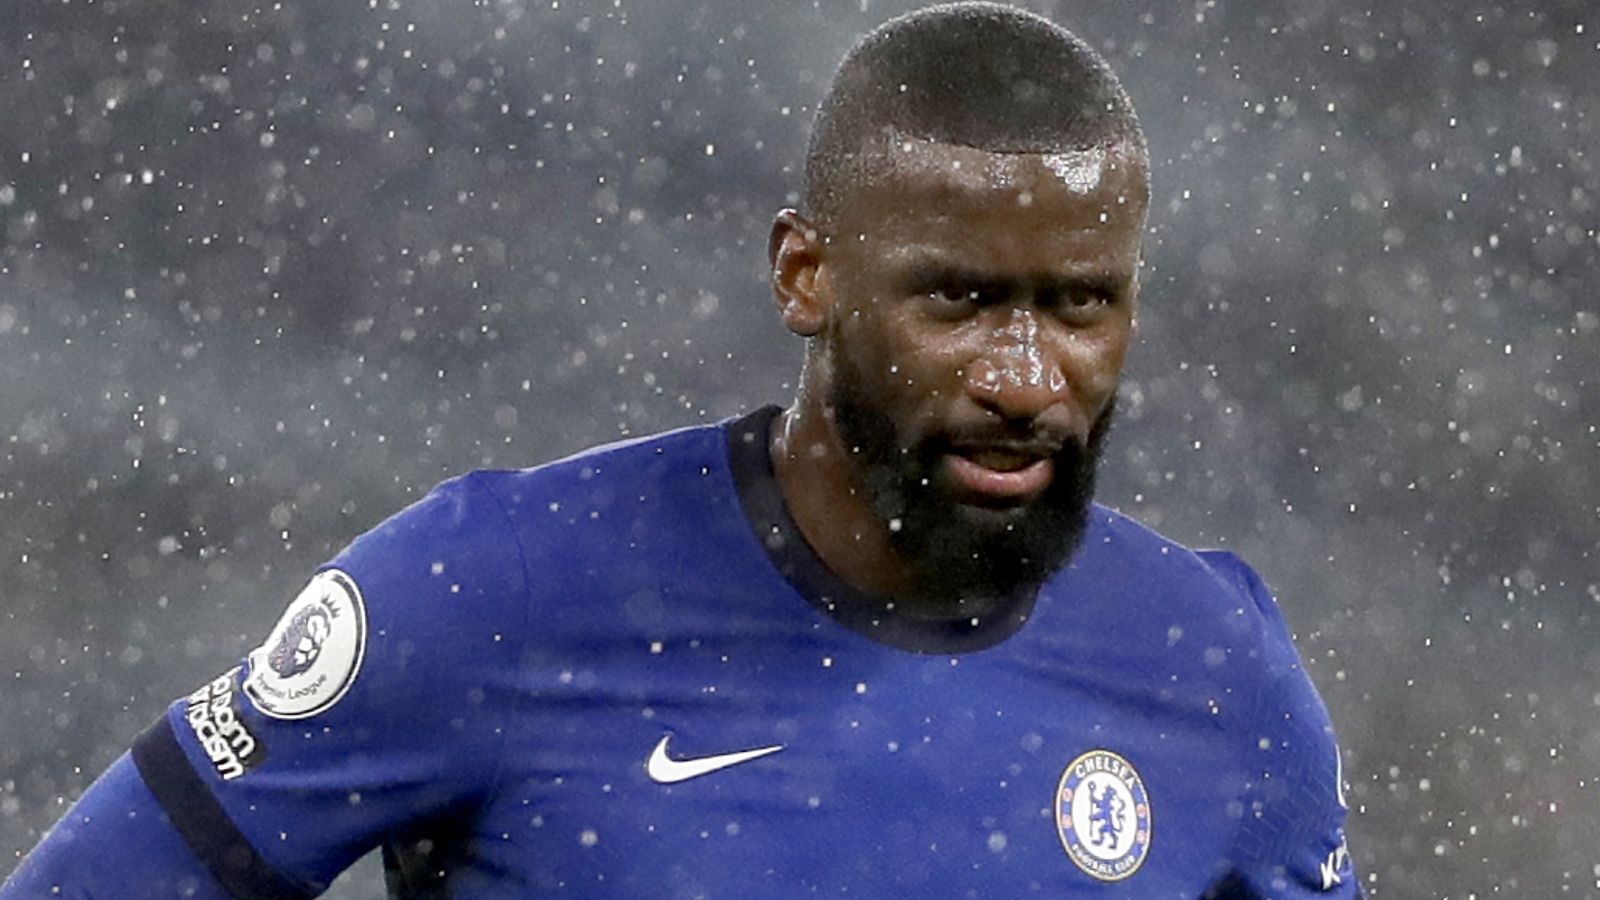 Antonio Rudiger: Chelsea defender reveals he suffered racist abuse on social media after Frank Lampard sacking